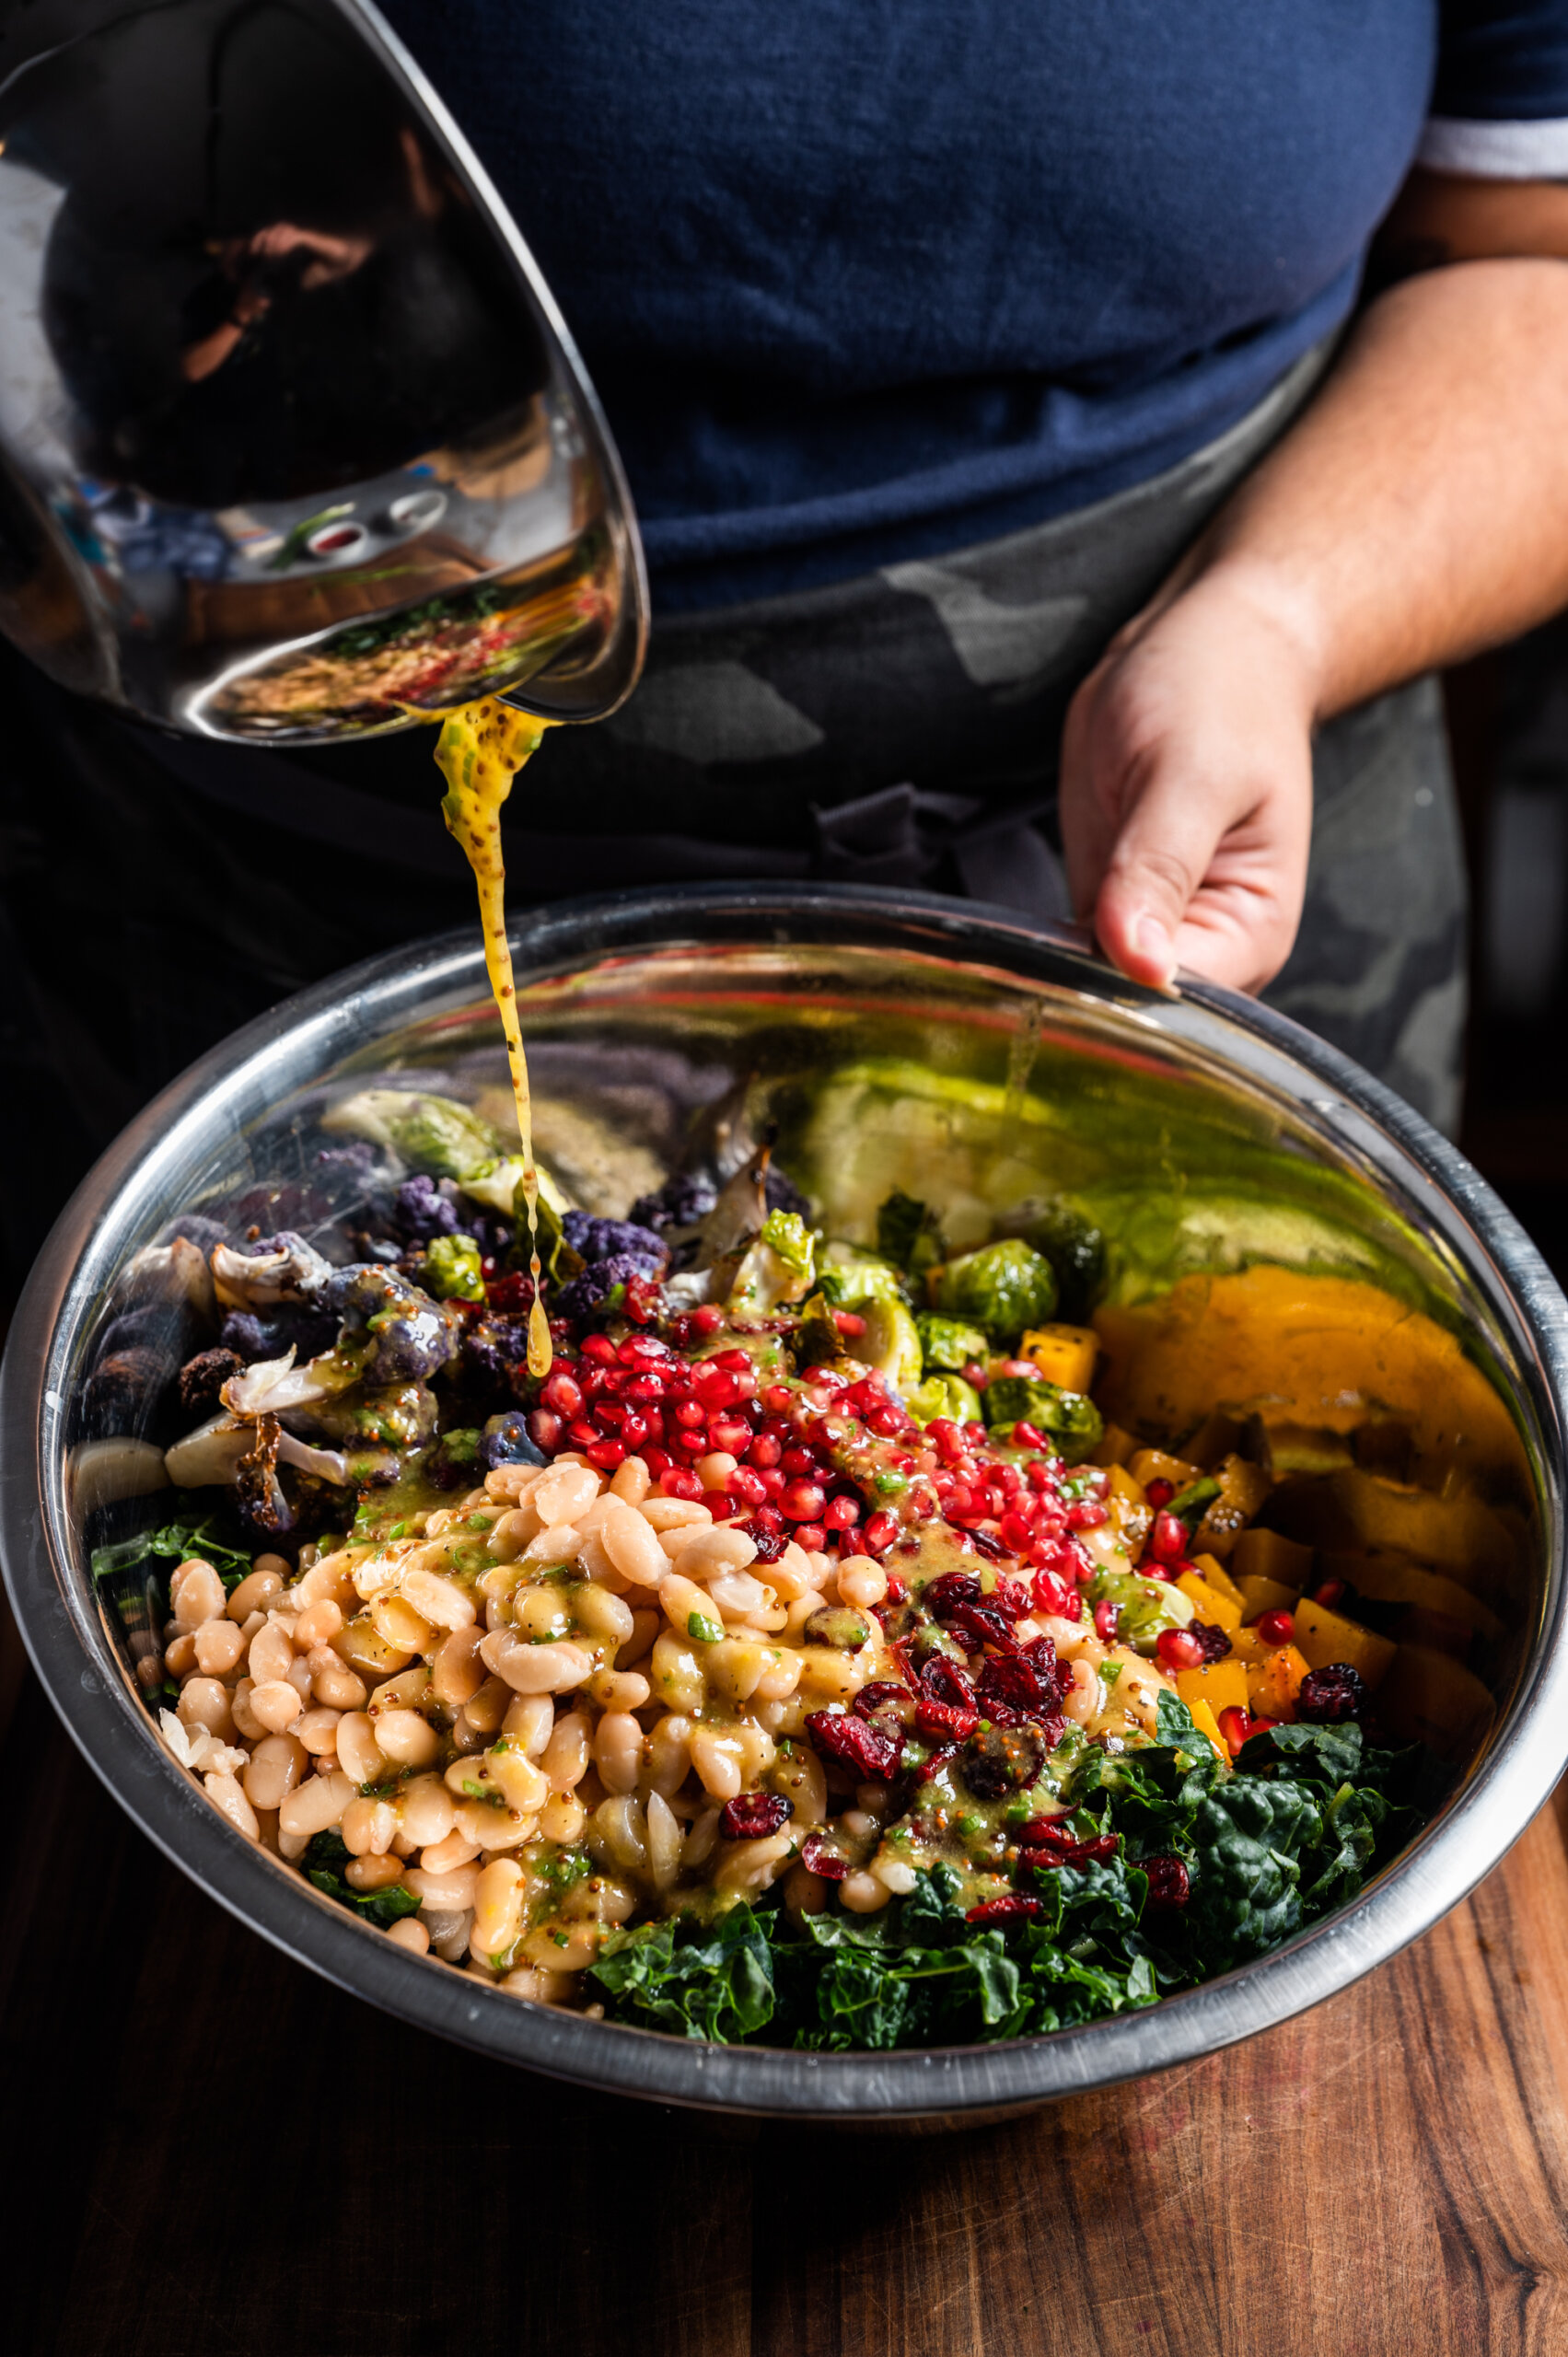 A vinaigrette is poured over all the salad ingredients